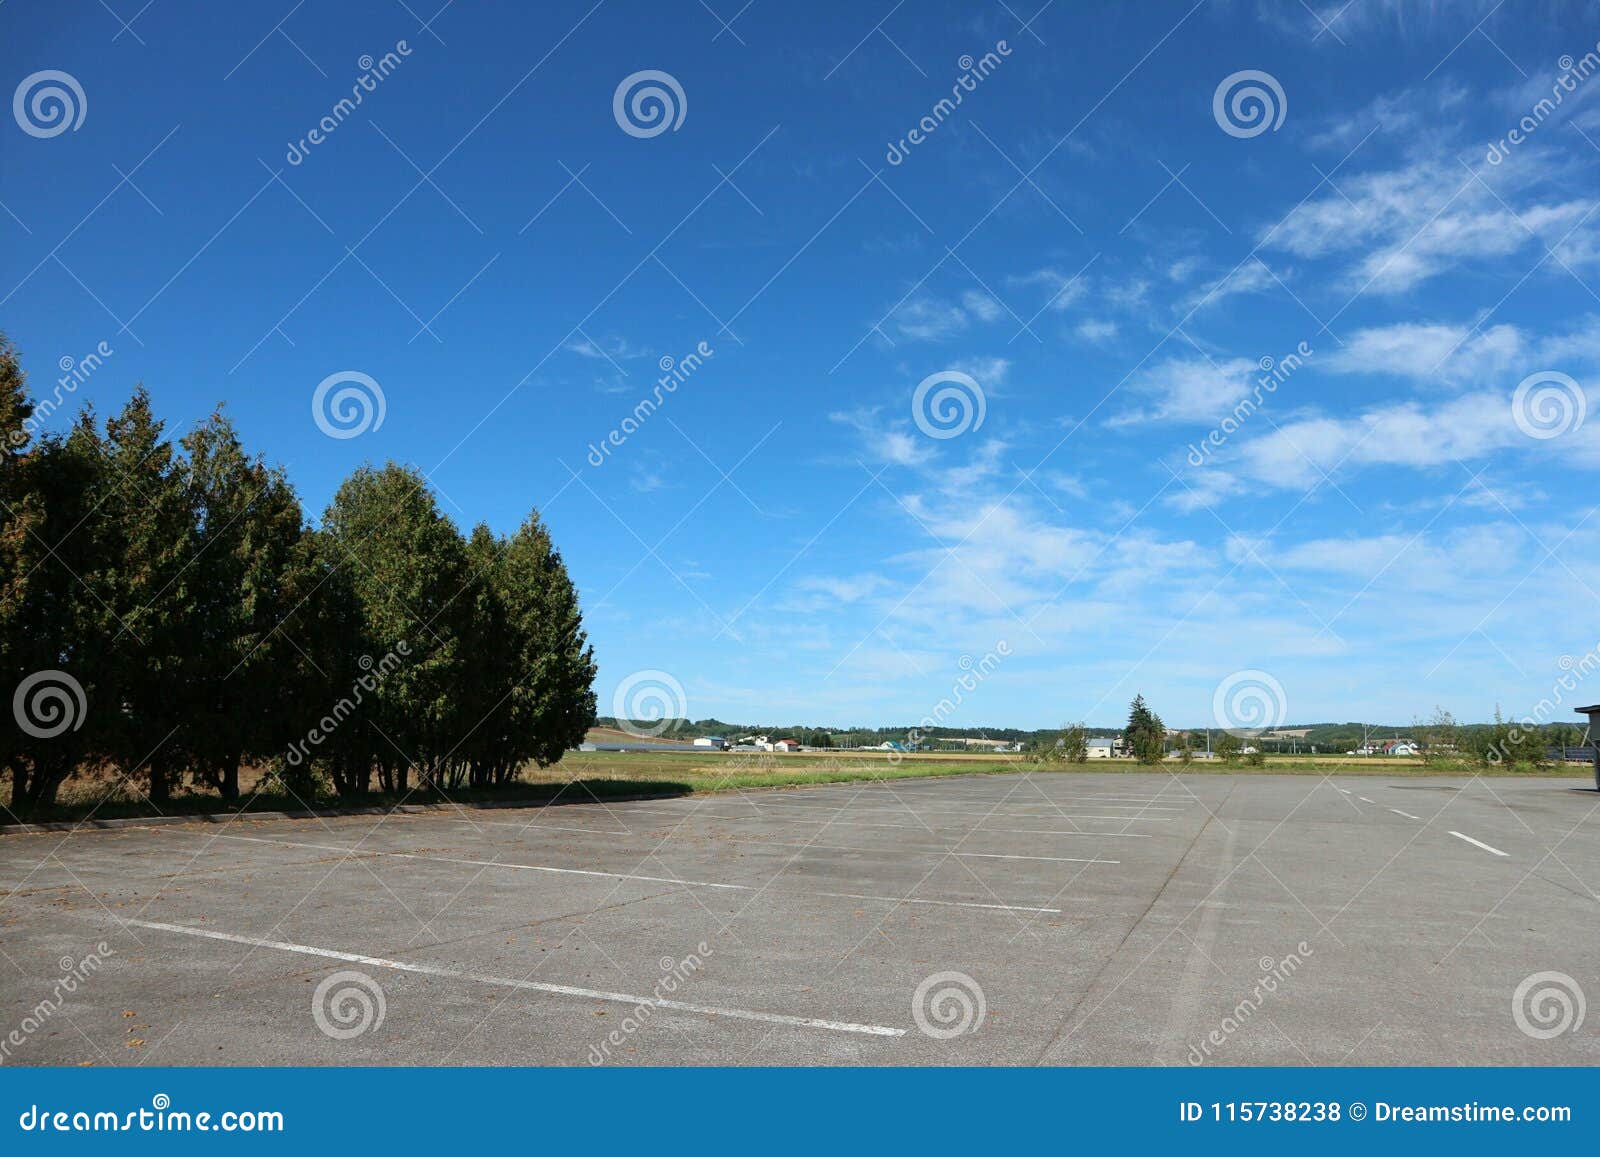 peace car parking, parking lots under the clear blue sky